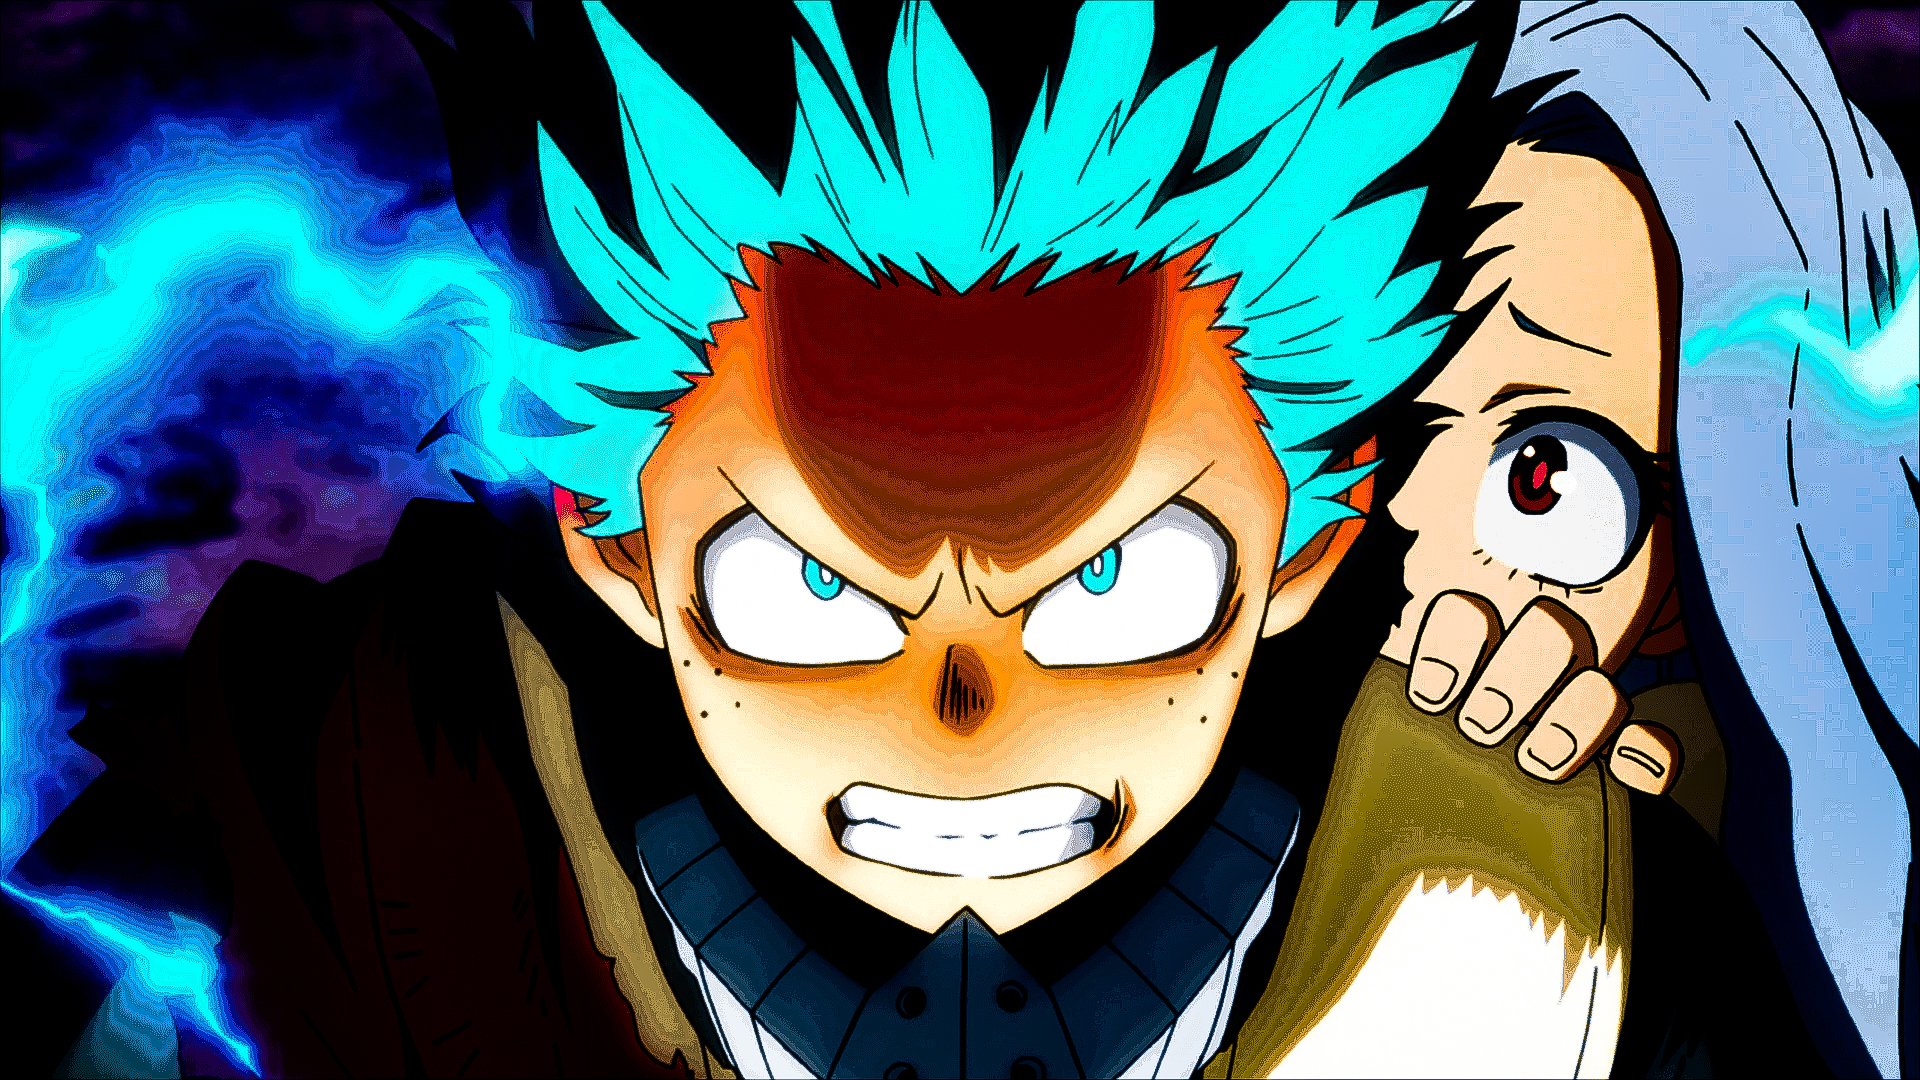 Boku no hero academia one for all 100% Image - ID: 365583 - Image Abyss